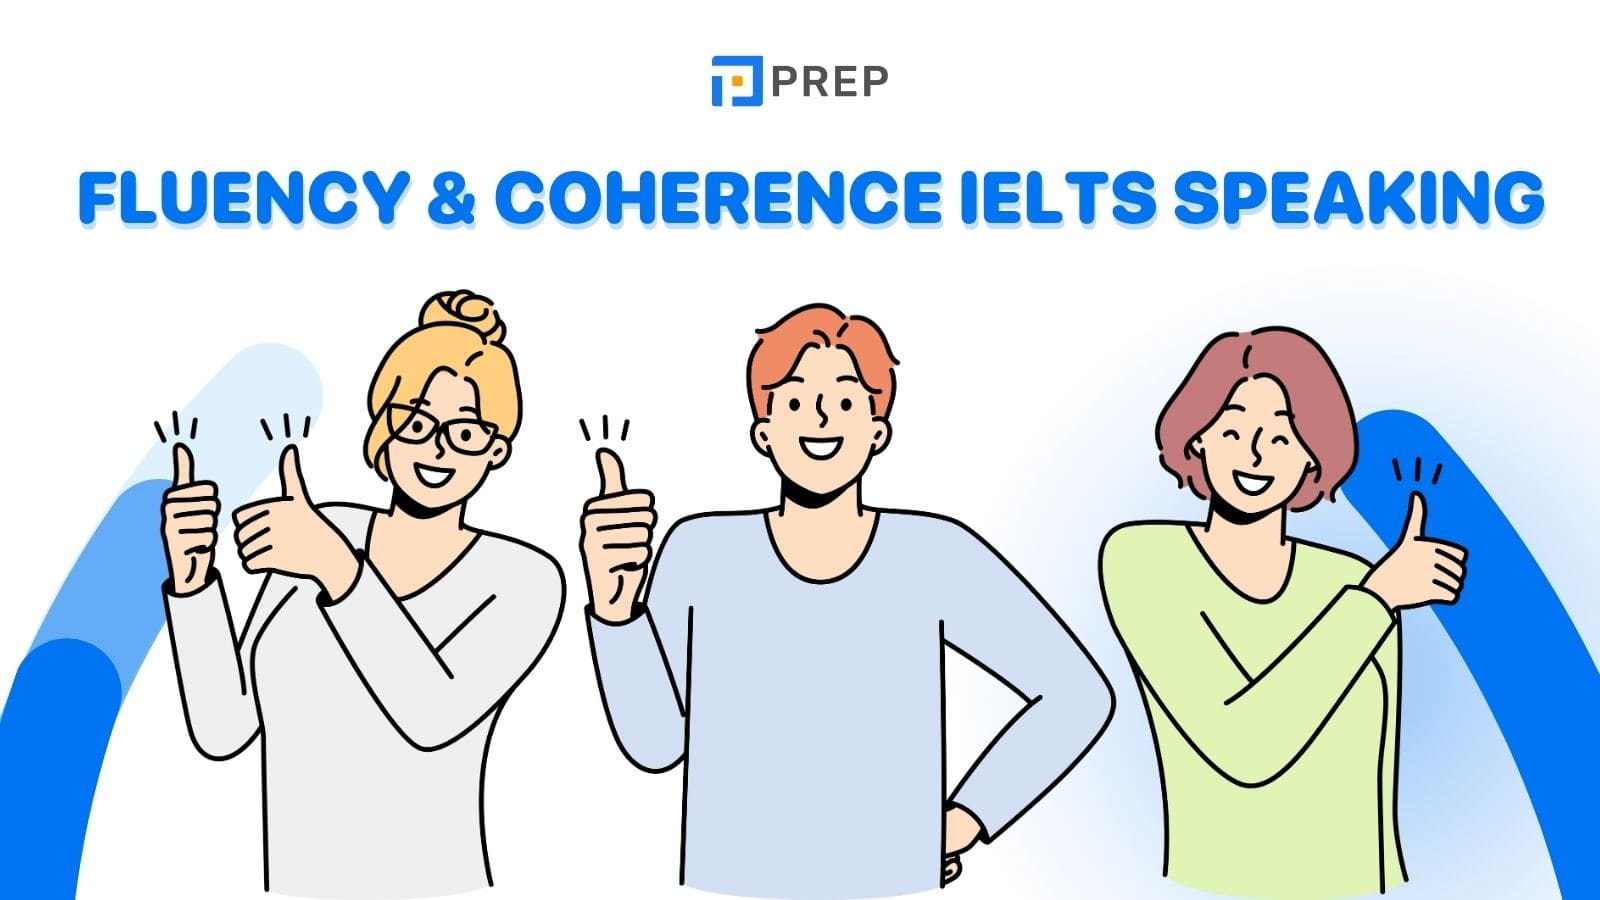 tieu-chi-fluency-and-coherence-ielts-speaking.jpg